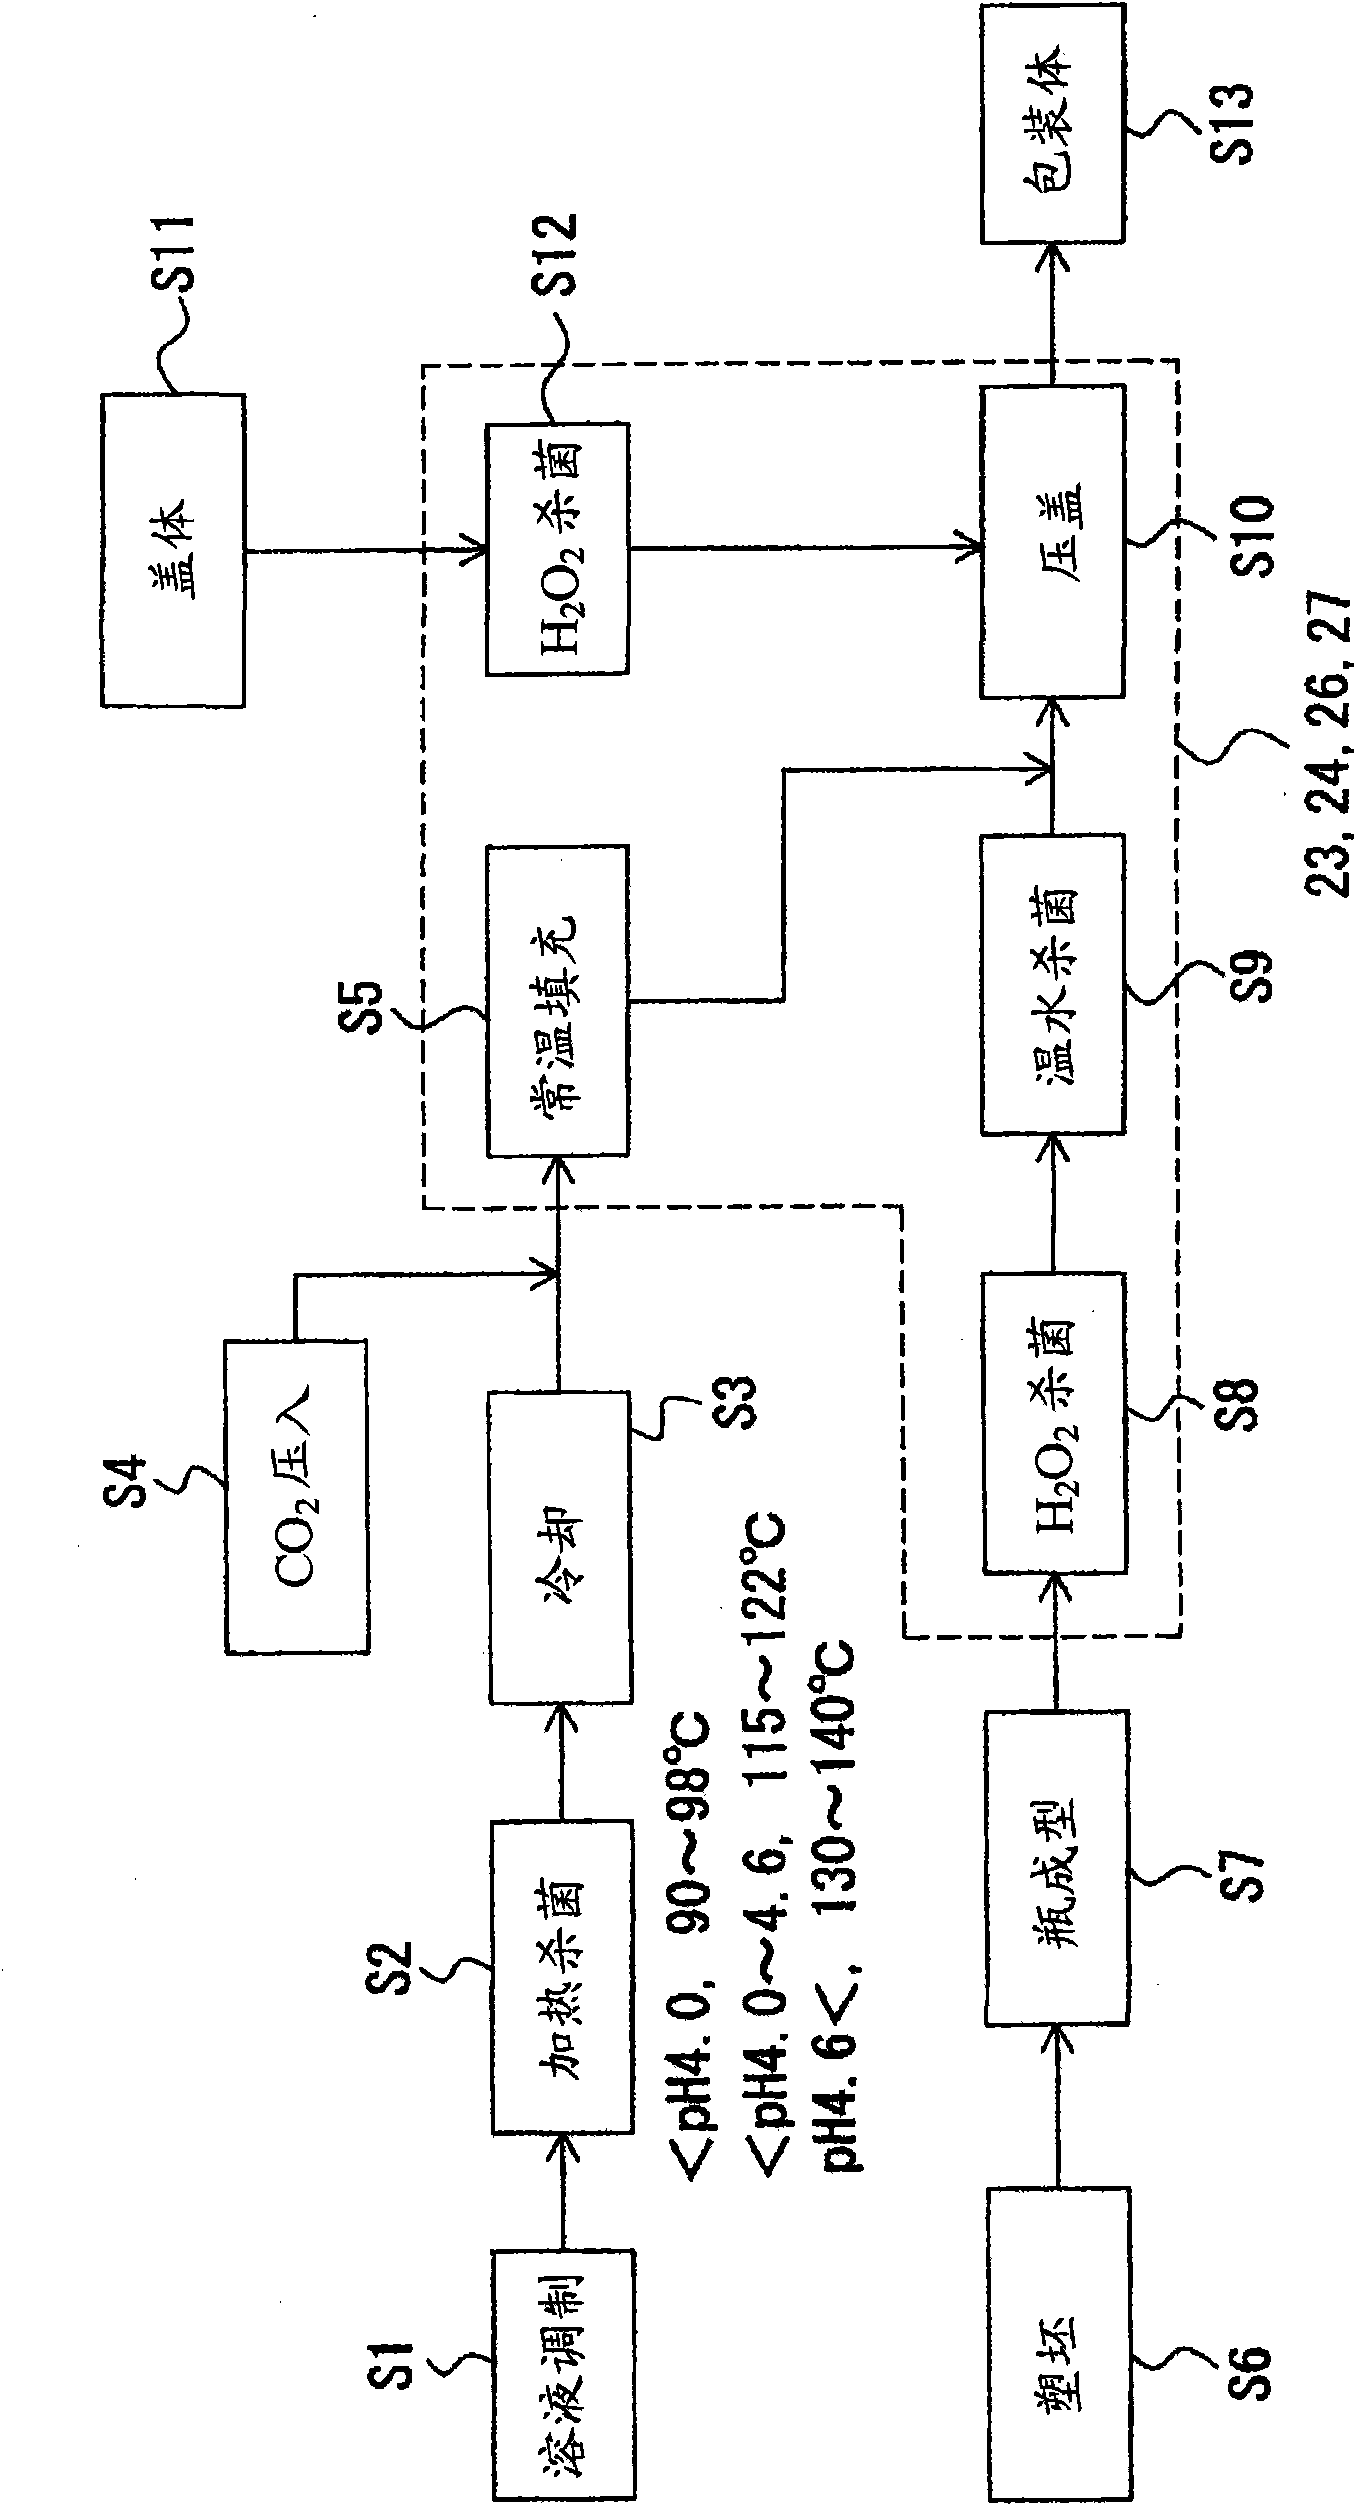 Packed product and method and apparatus for producing the same